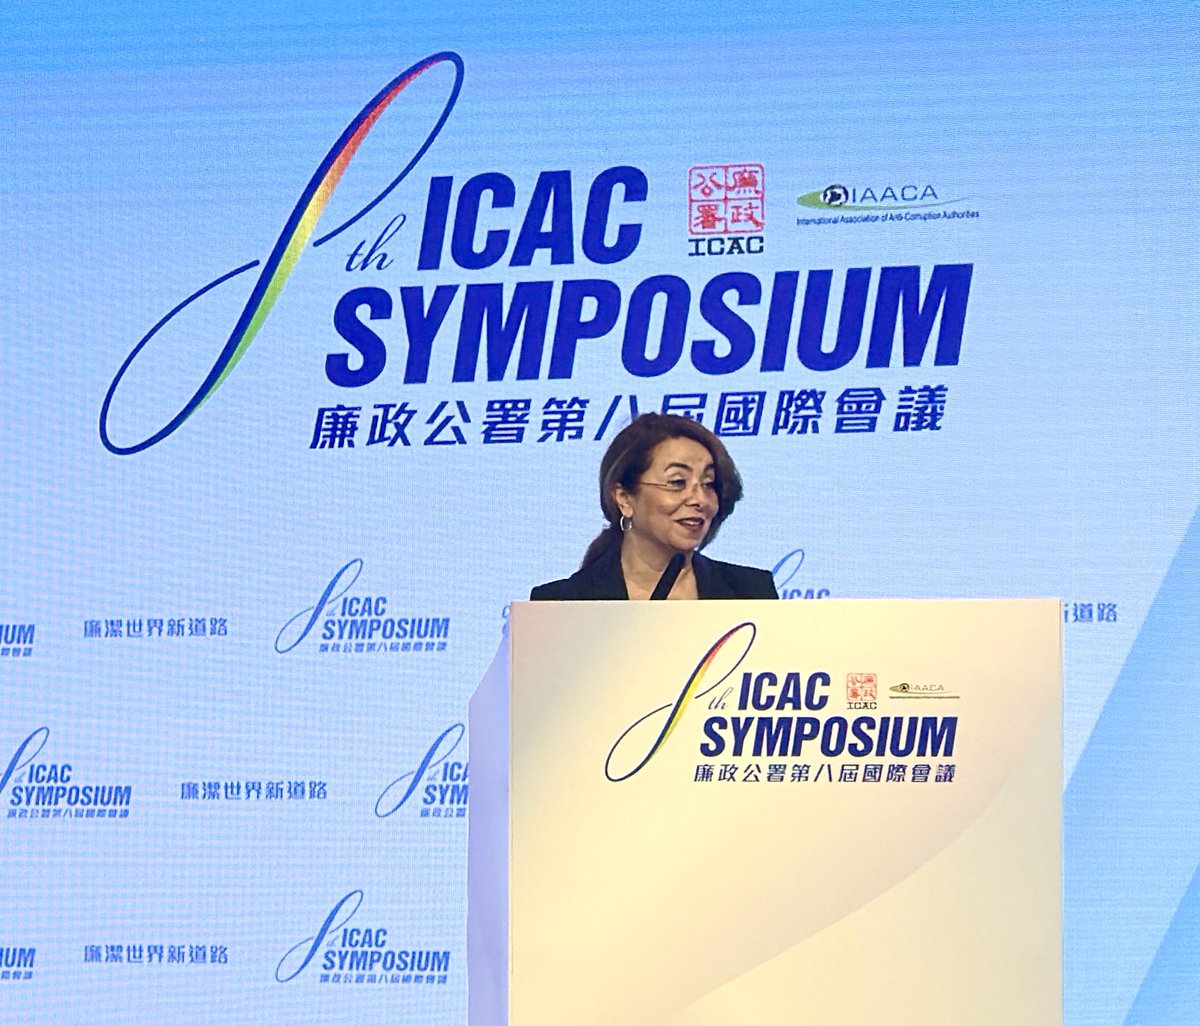 Corruption underpins many of the biggest challenges facing humanity today. I was pleased to address the 8th ICAC Symposium here in Hong Kong, to renew our commitment to integrity, accountability and transparency in the fight against corruption.